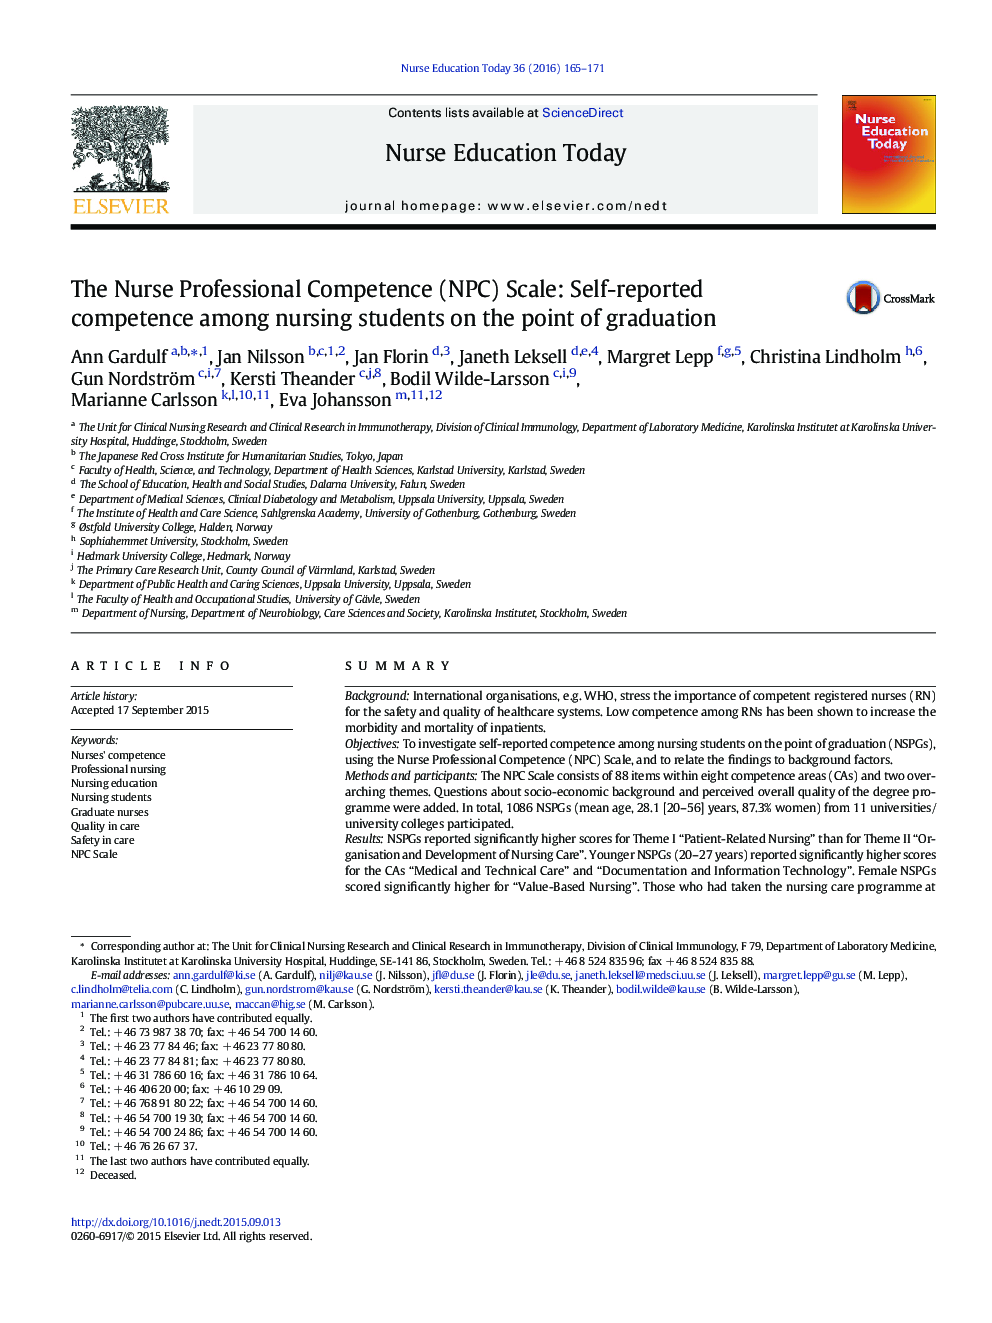 The Nurse Professional Competence (NPC) Scale: Self-reported competence among nursing students on the point of graduation